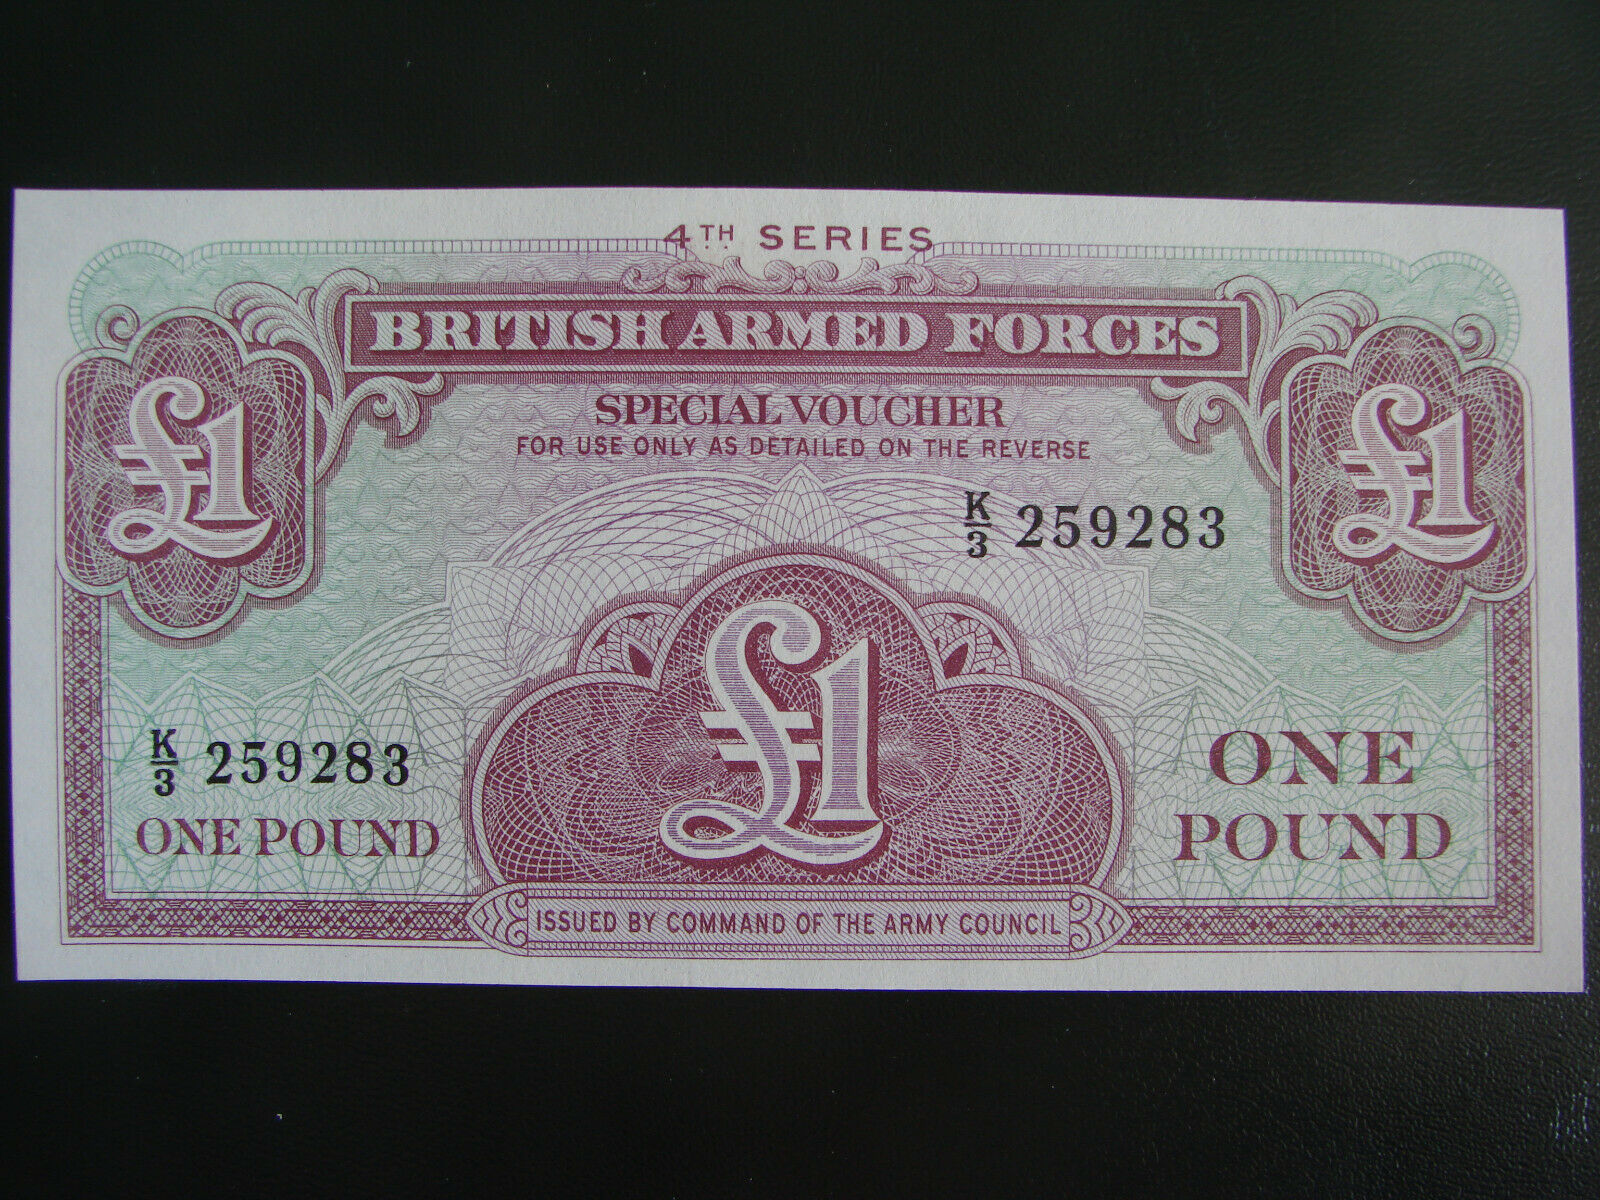 Banknote British Armed Forces Special Voucher 1£